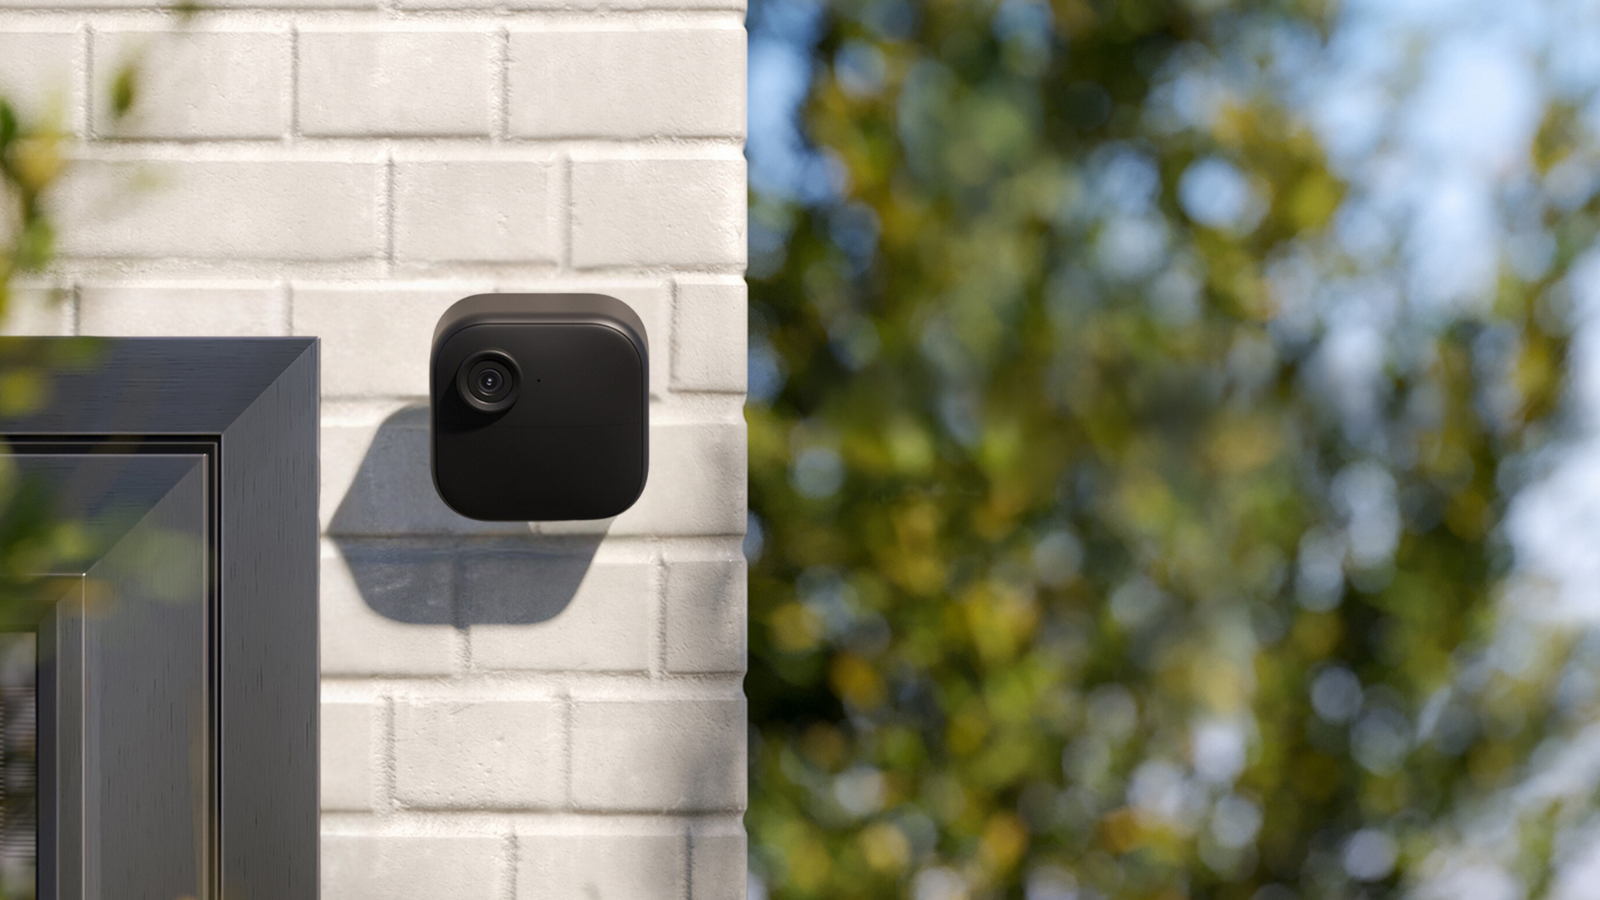 Blink outdoor security camera on wall outside home